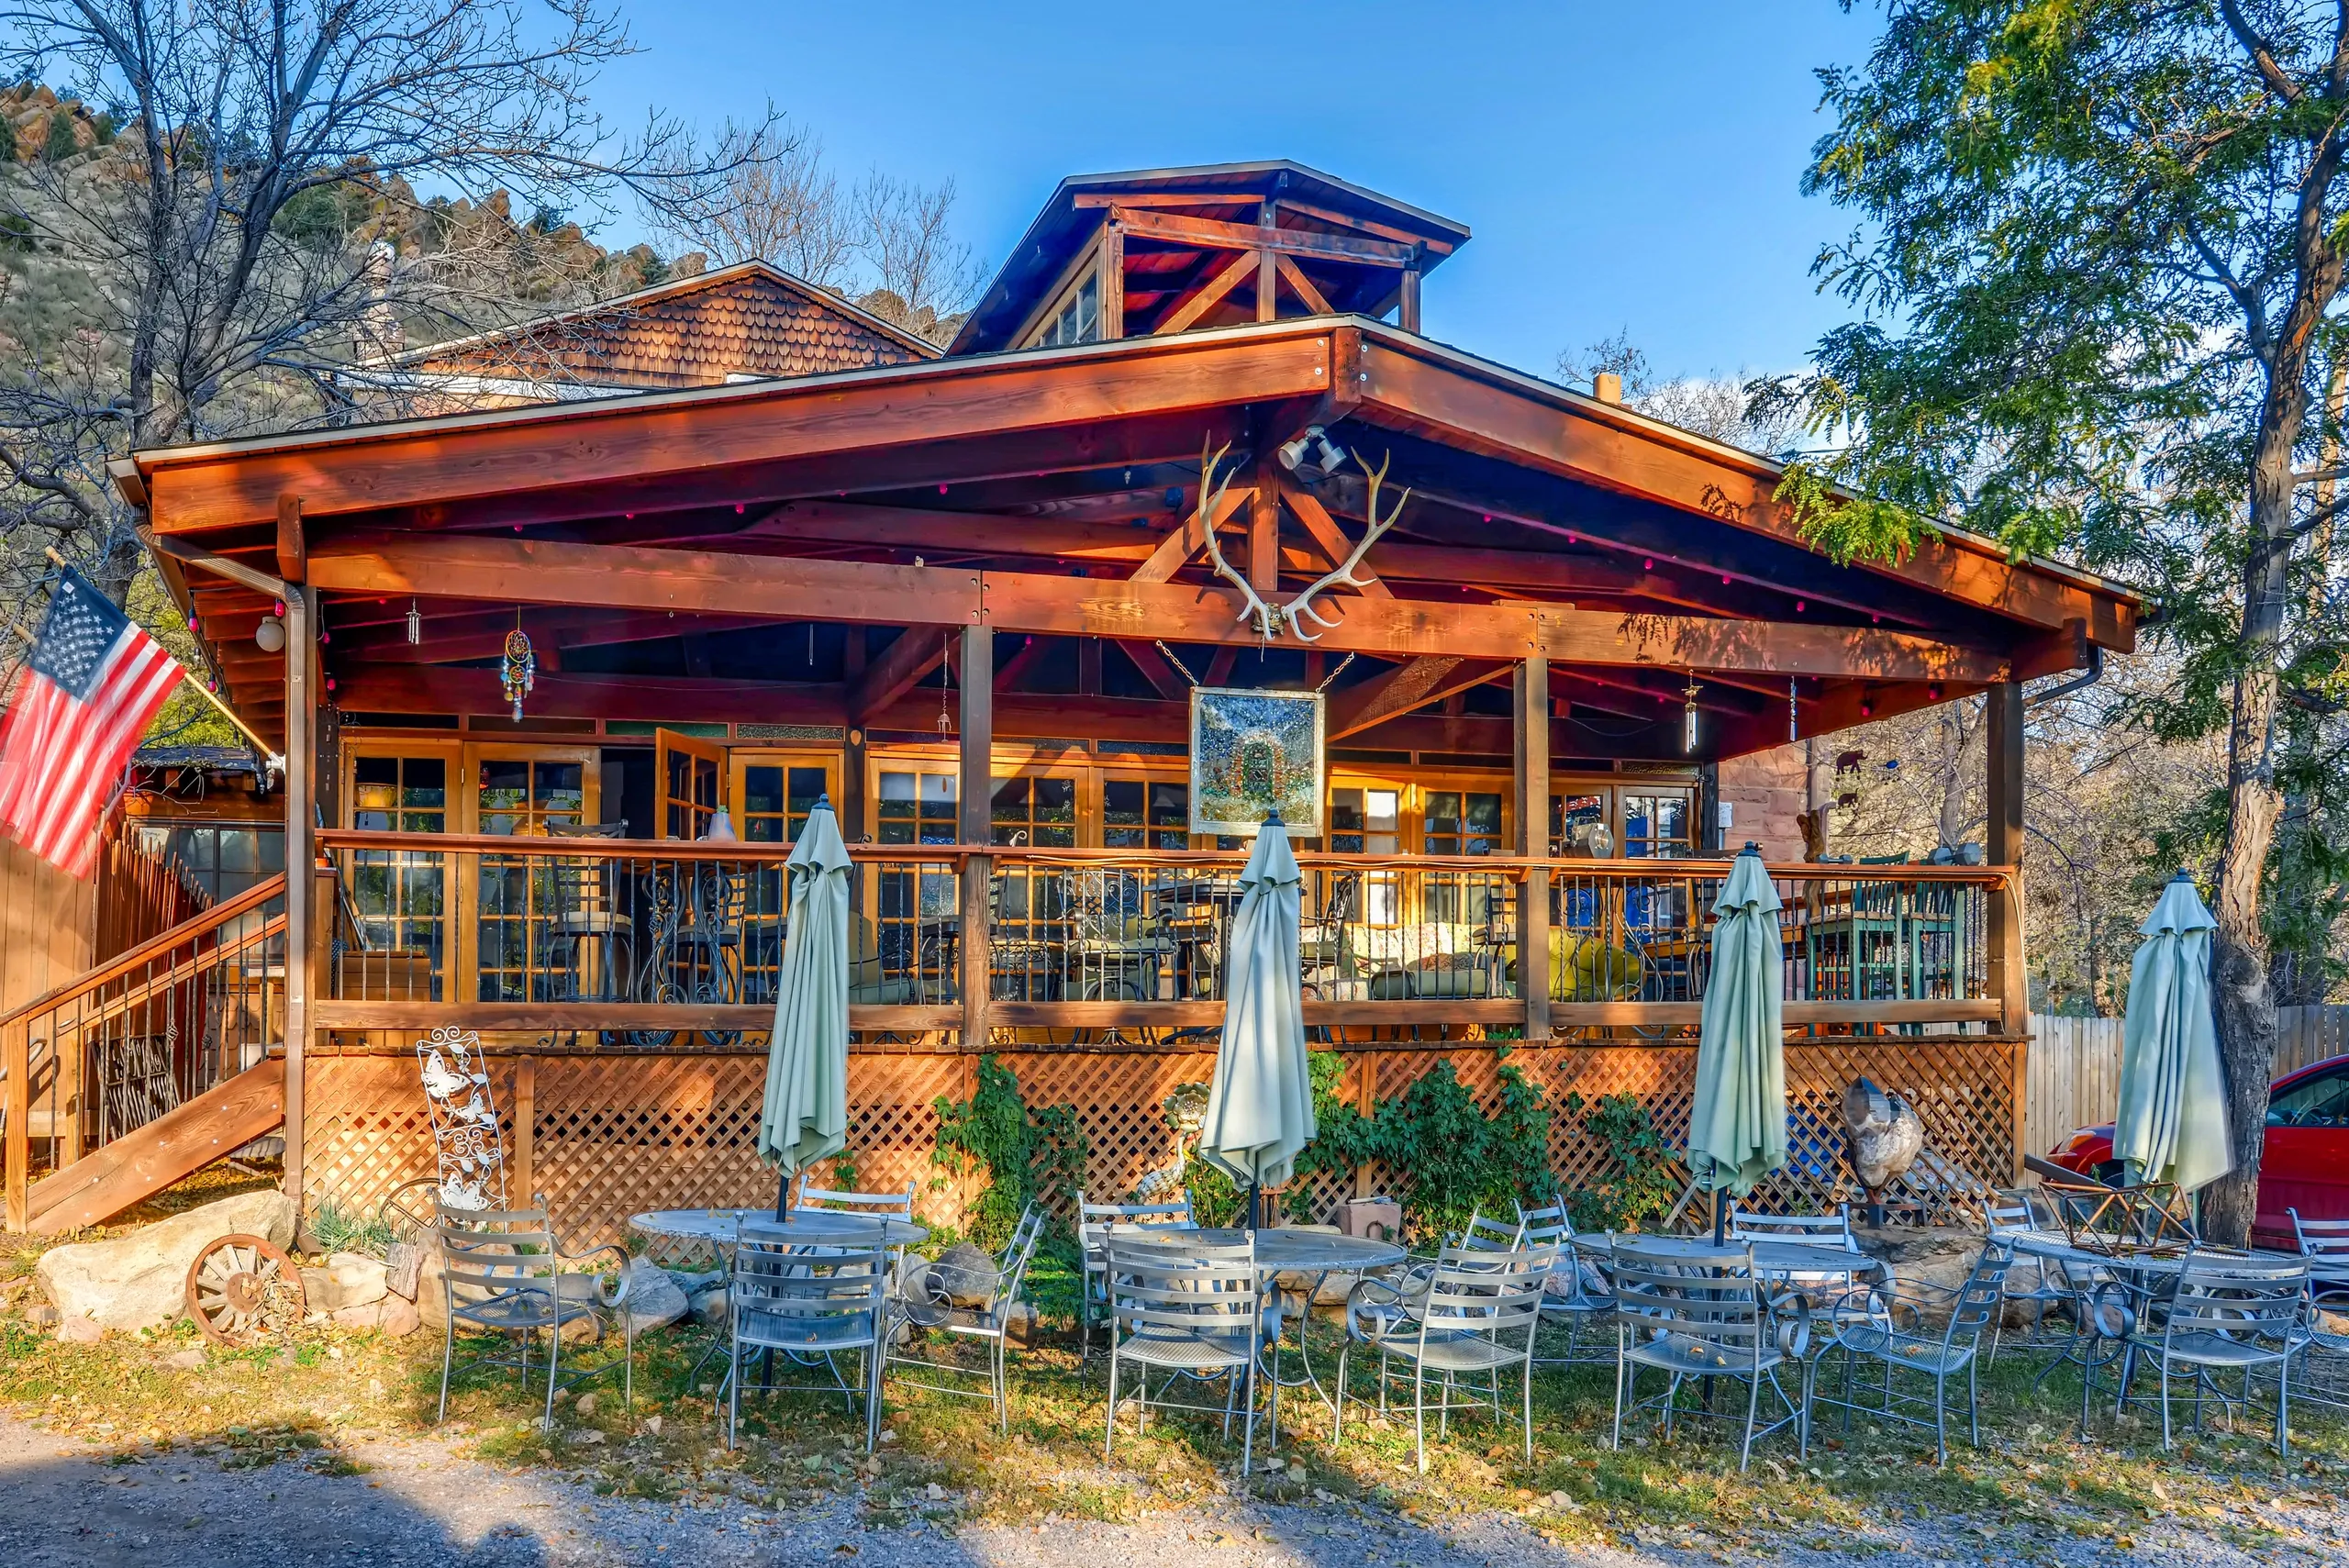 Exterior image of Cliff House Lodge in Morrison, Colorado that has wooden architecture and a porch with tables and chairs for dining on the porch and on the grass in front of the building.